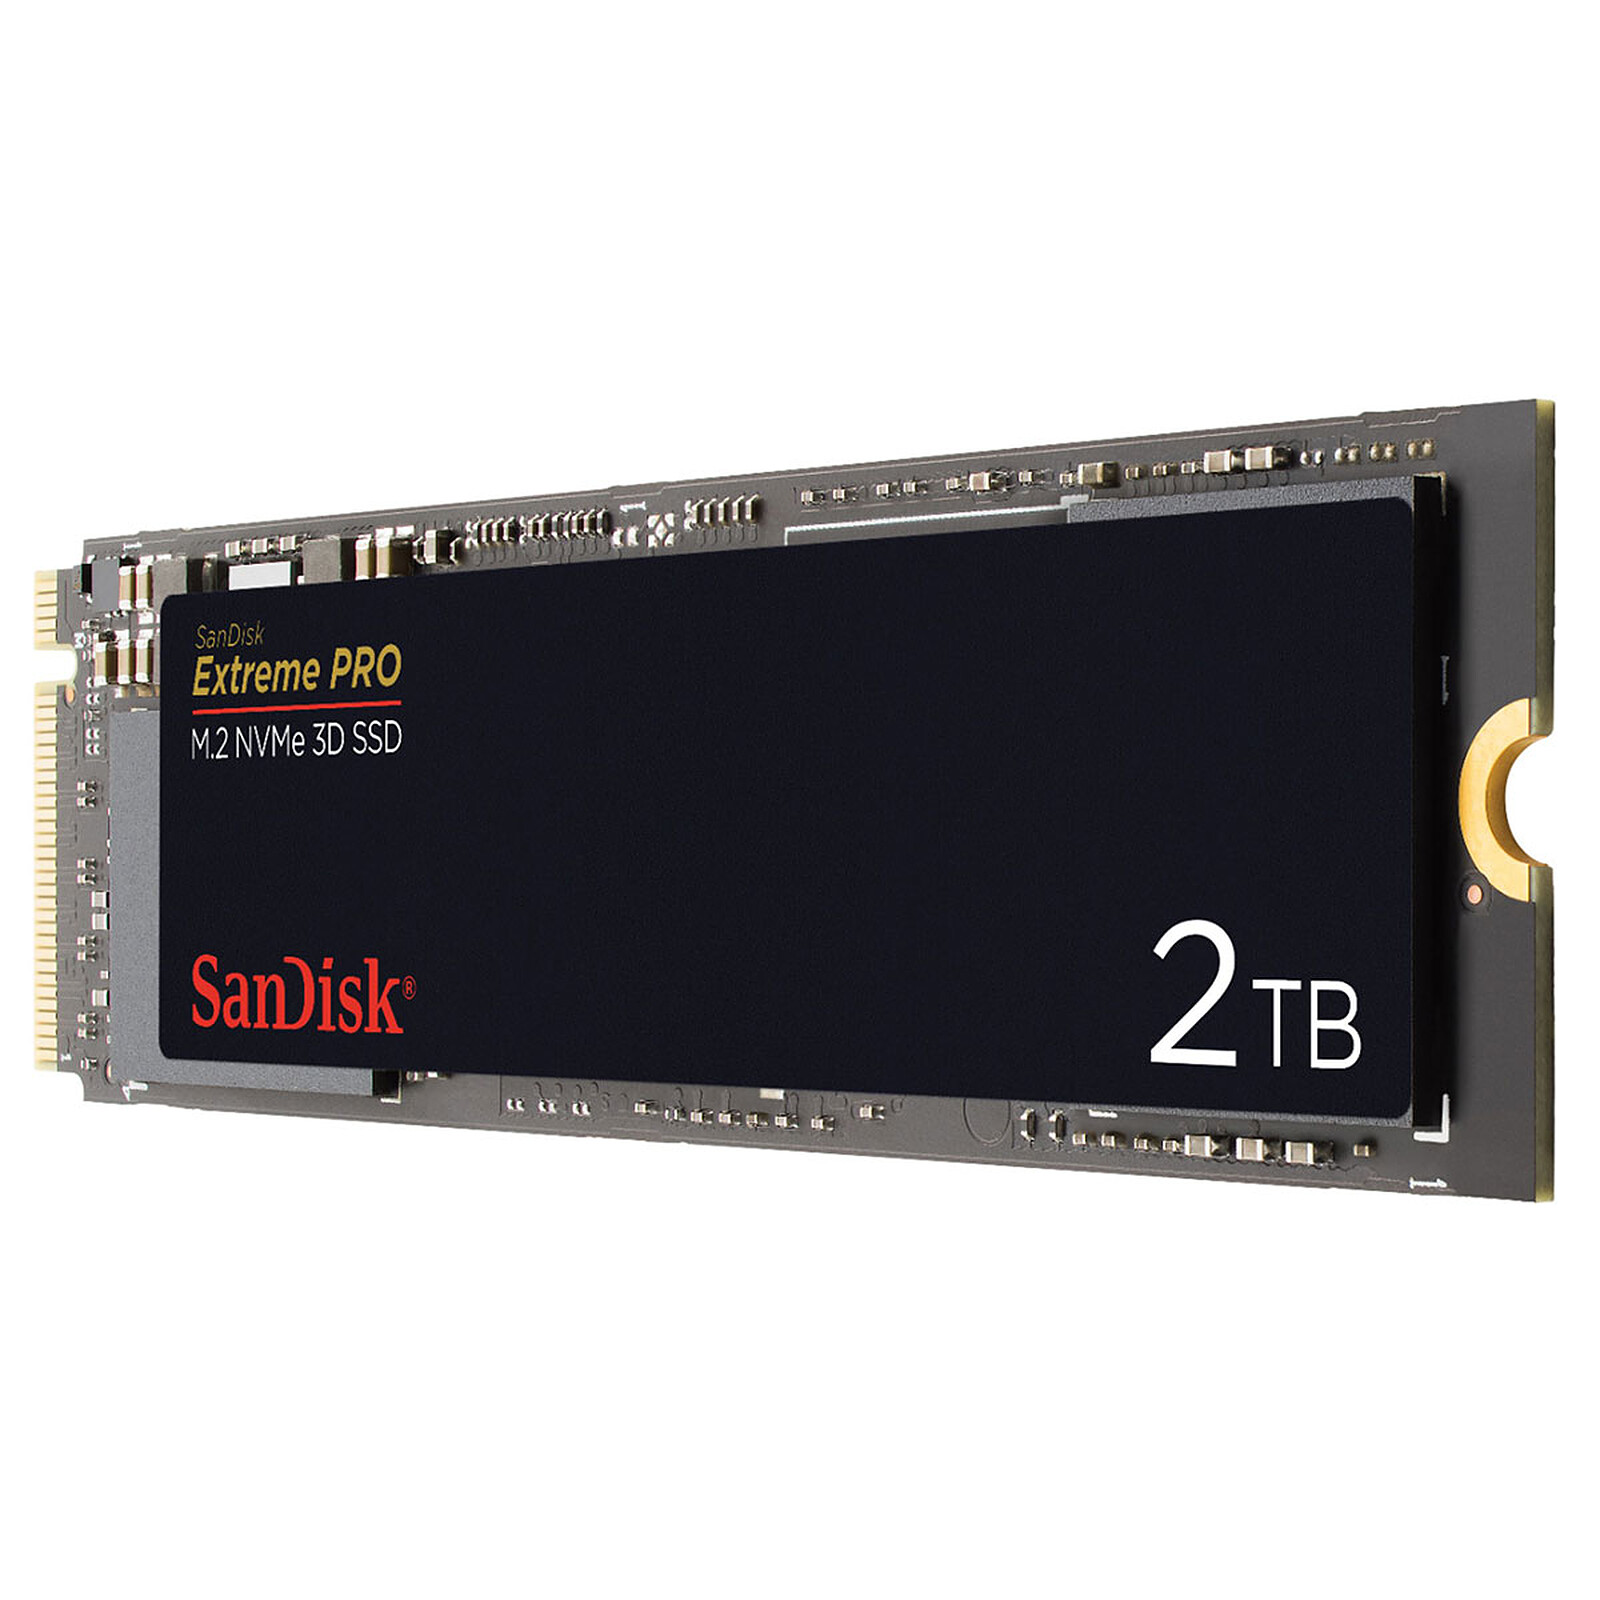 Samsung SSD 970 PRO M.2 PCIe NVMe 1 To - Disque SSD - LDLC